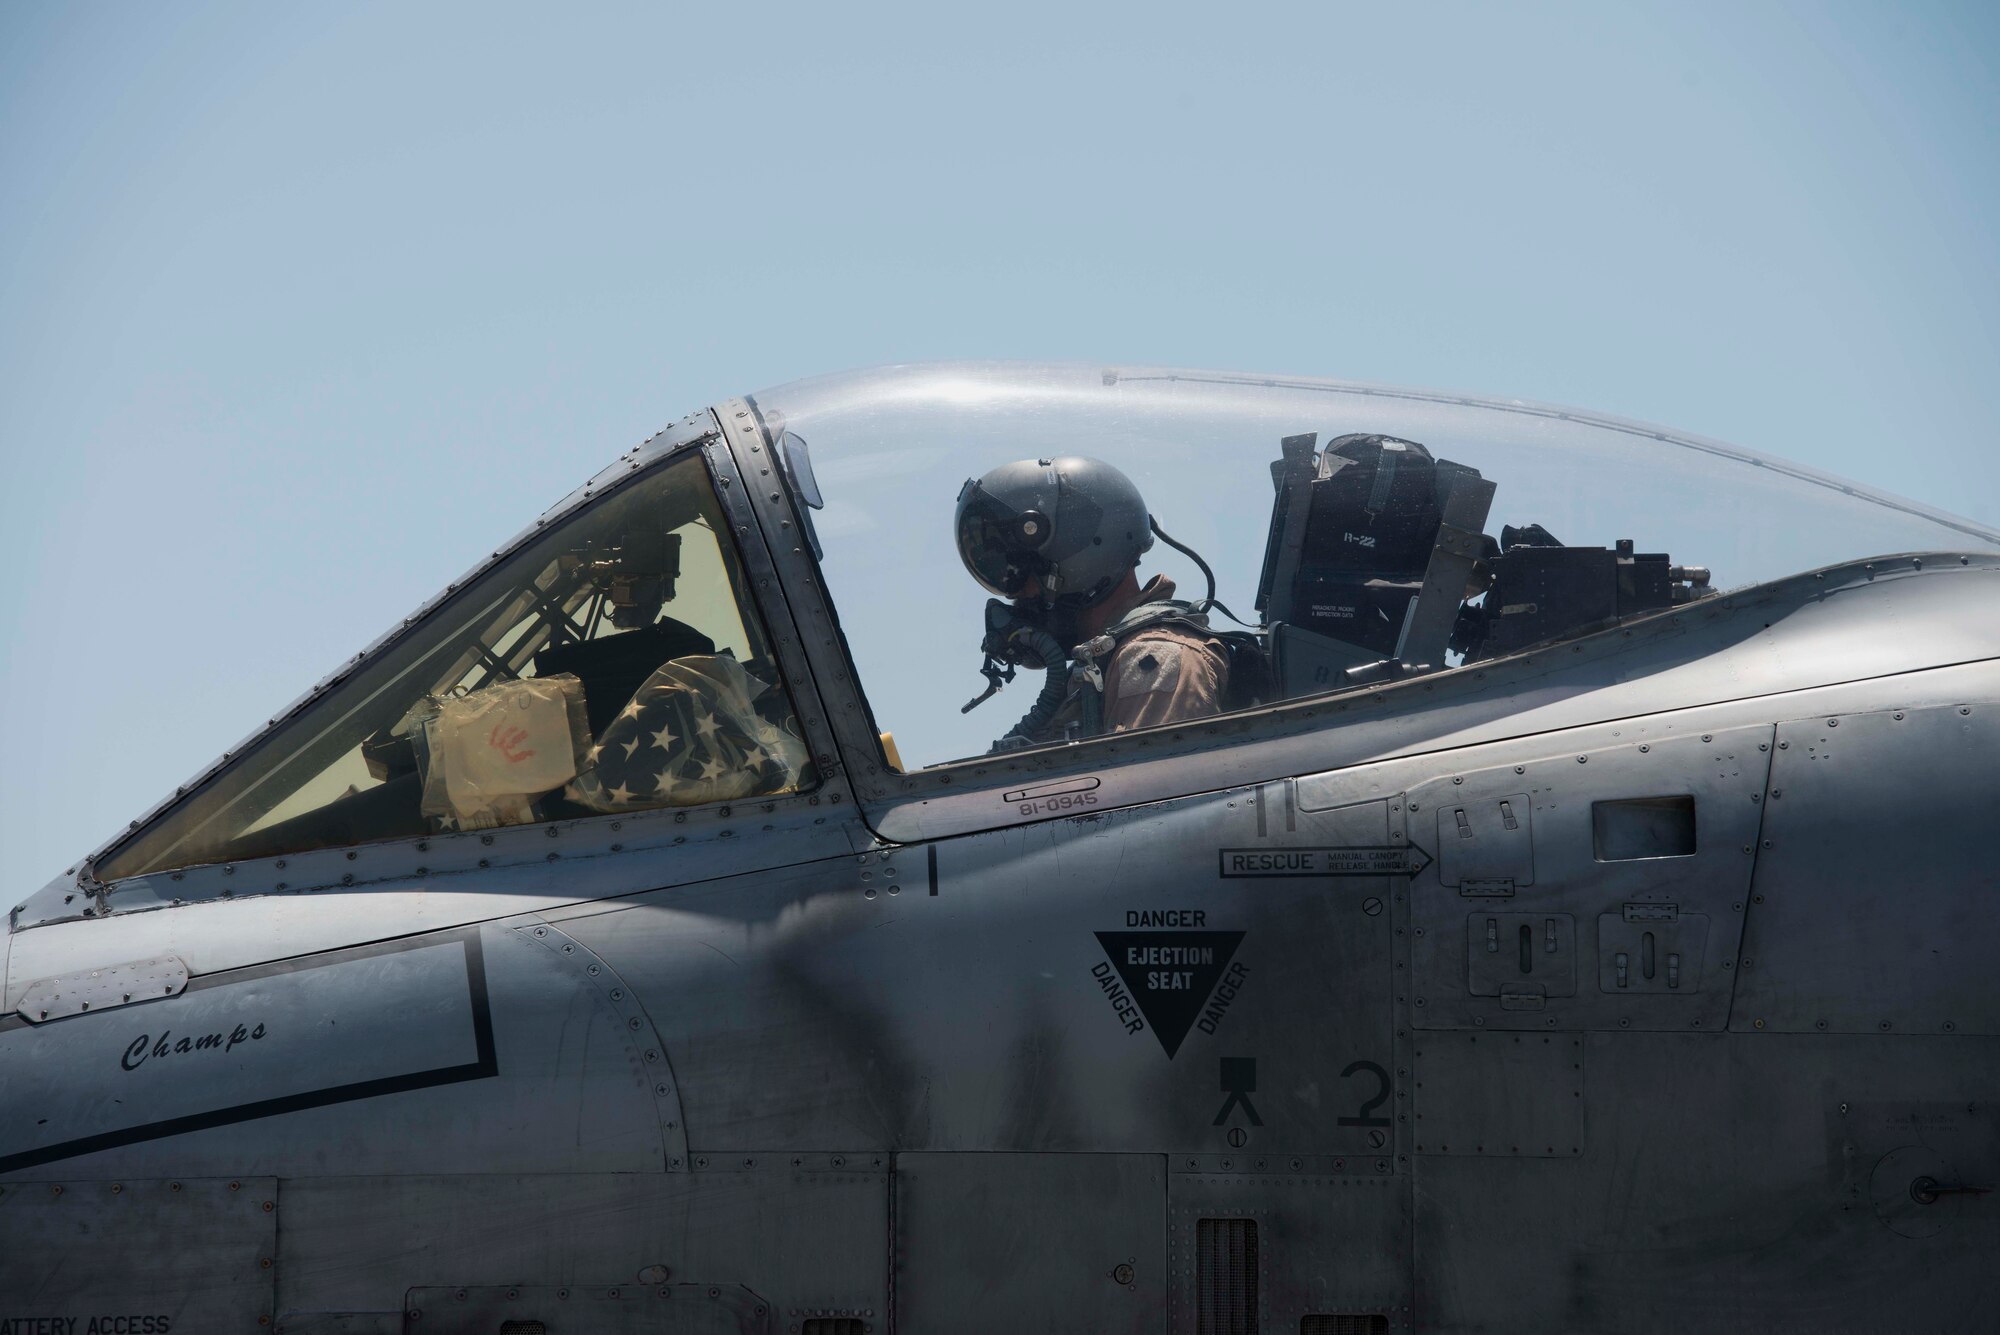 A U.S. Air Force pilot with the 354th Expeditionary Fighter Squadron, conducts a pre-flight check in an A-10 Thunderbolt II May 11, 2017, at Incirlik Air Base, Turkey, in support of Operation INHERENT RESOLVE. Pre-flight checks are accomplished to ensure the aircraft is prepared for flight. (U.S. Air Force photo by Airman 1st Class Devin M. Rumbaugh)